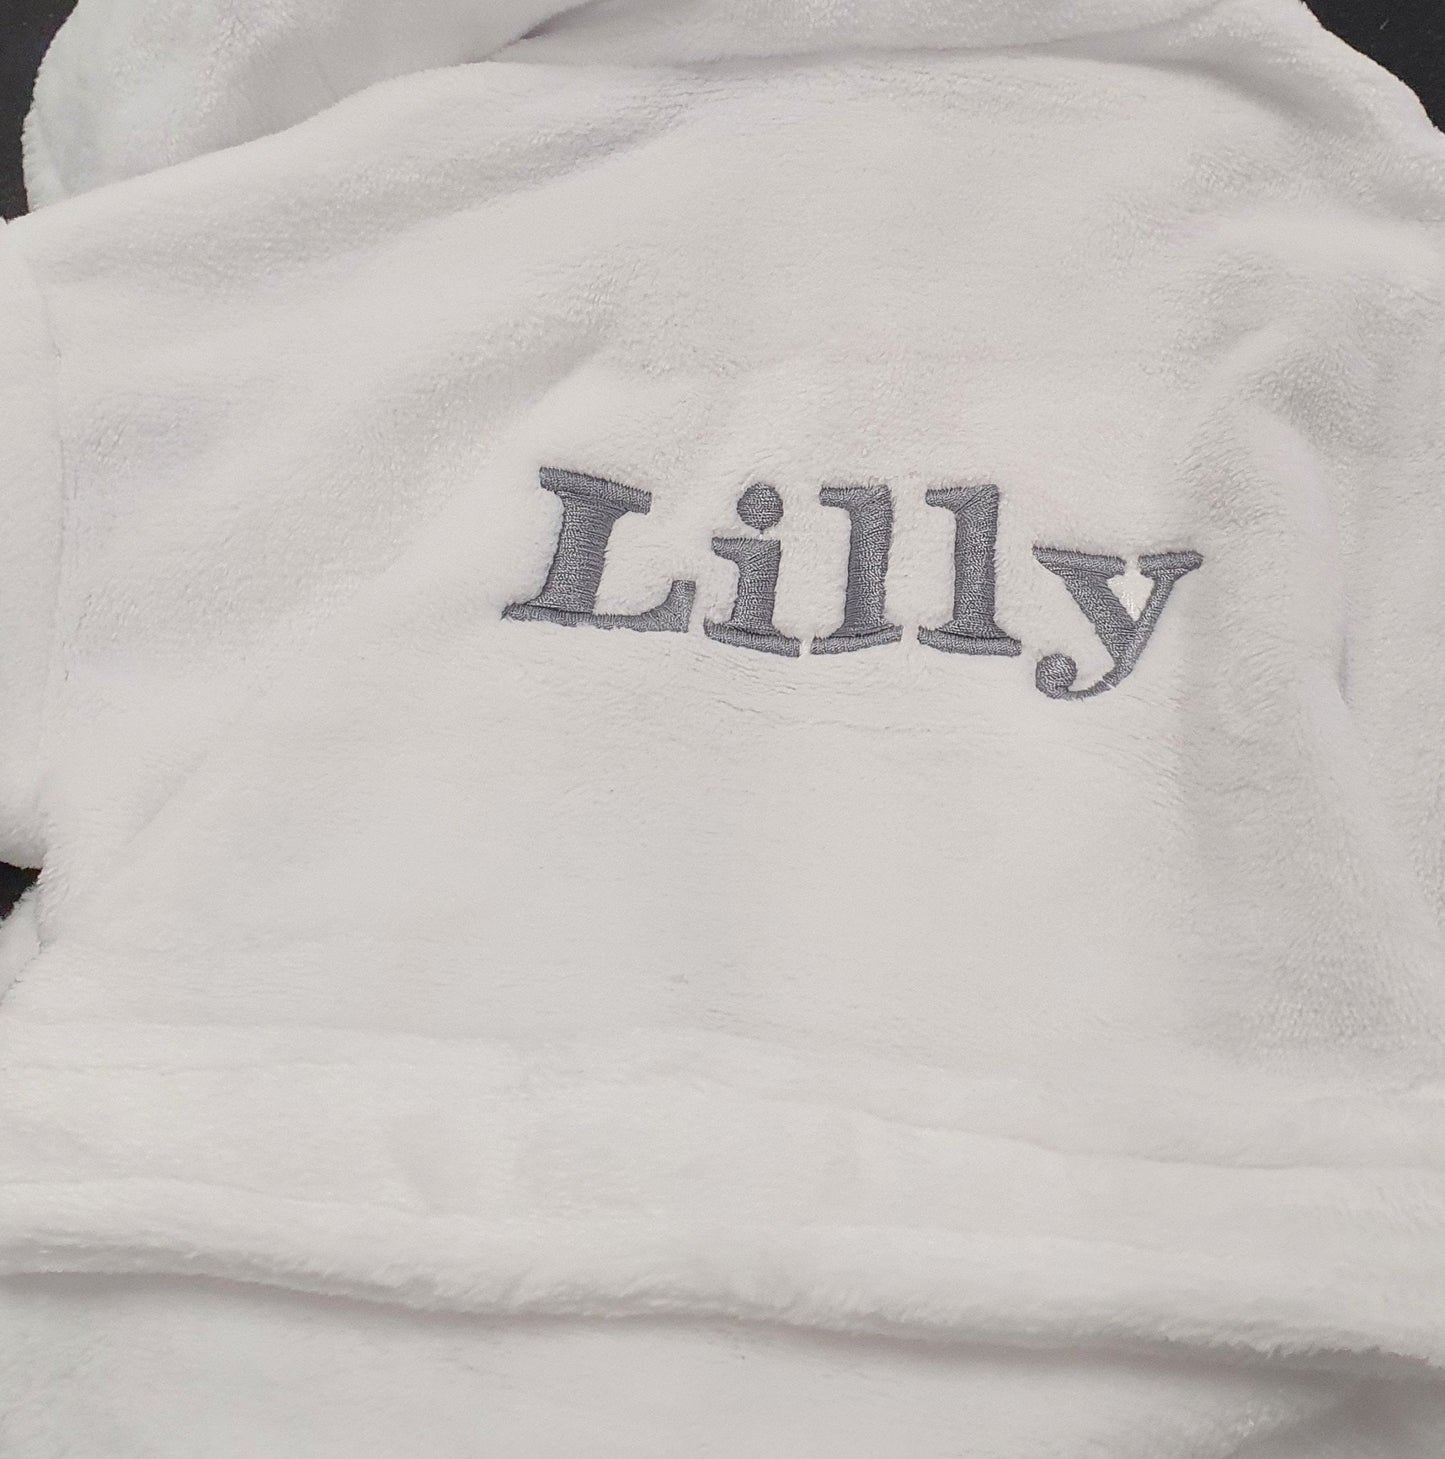 Personalised White Baby Hooded Dressing Gown - Nana B Baby & Childrenswear Boutique